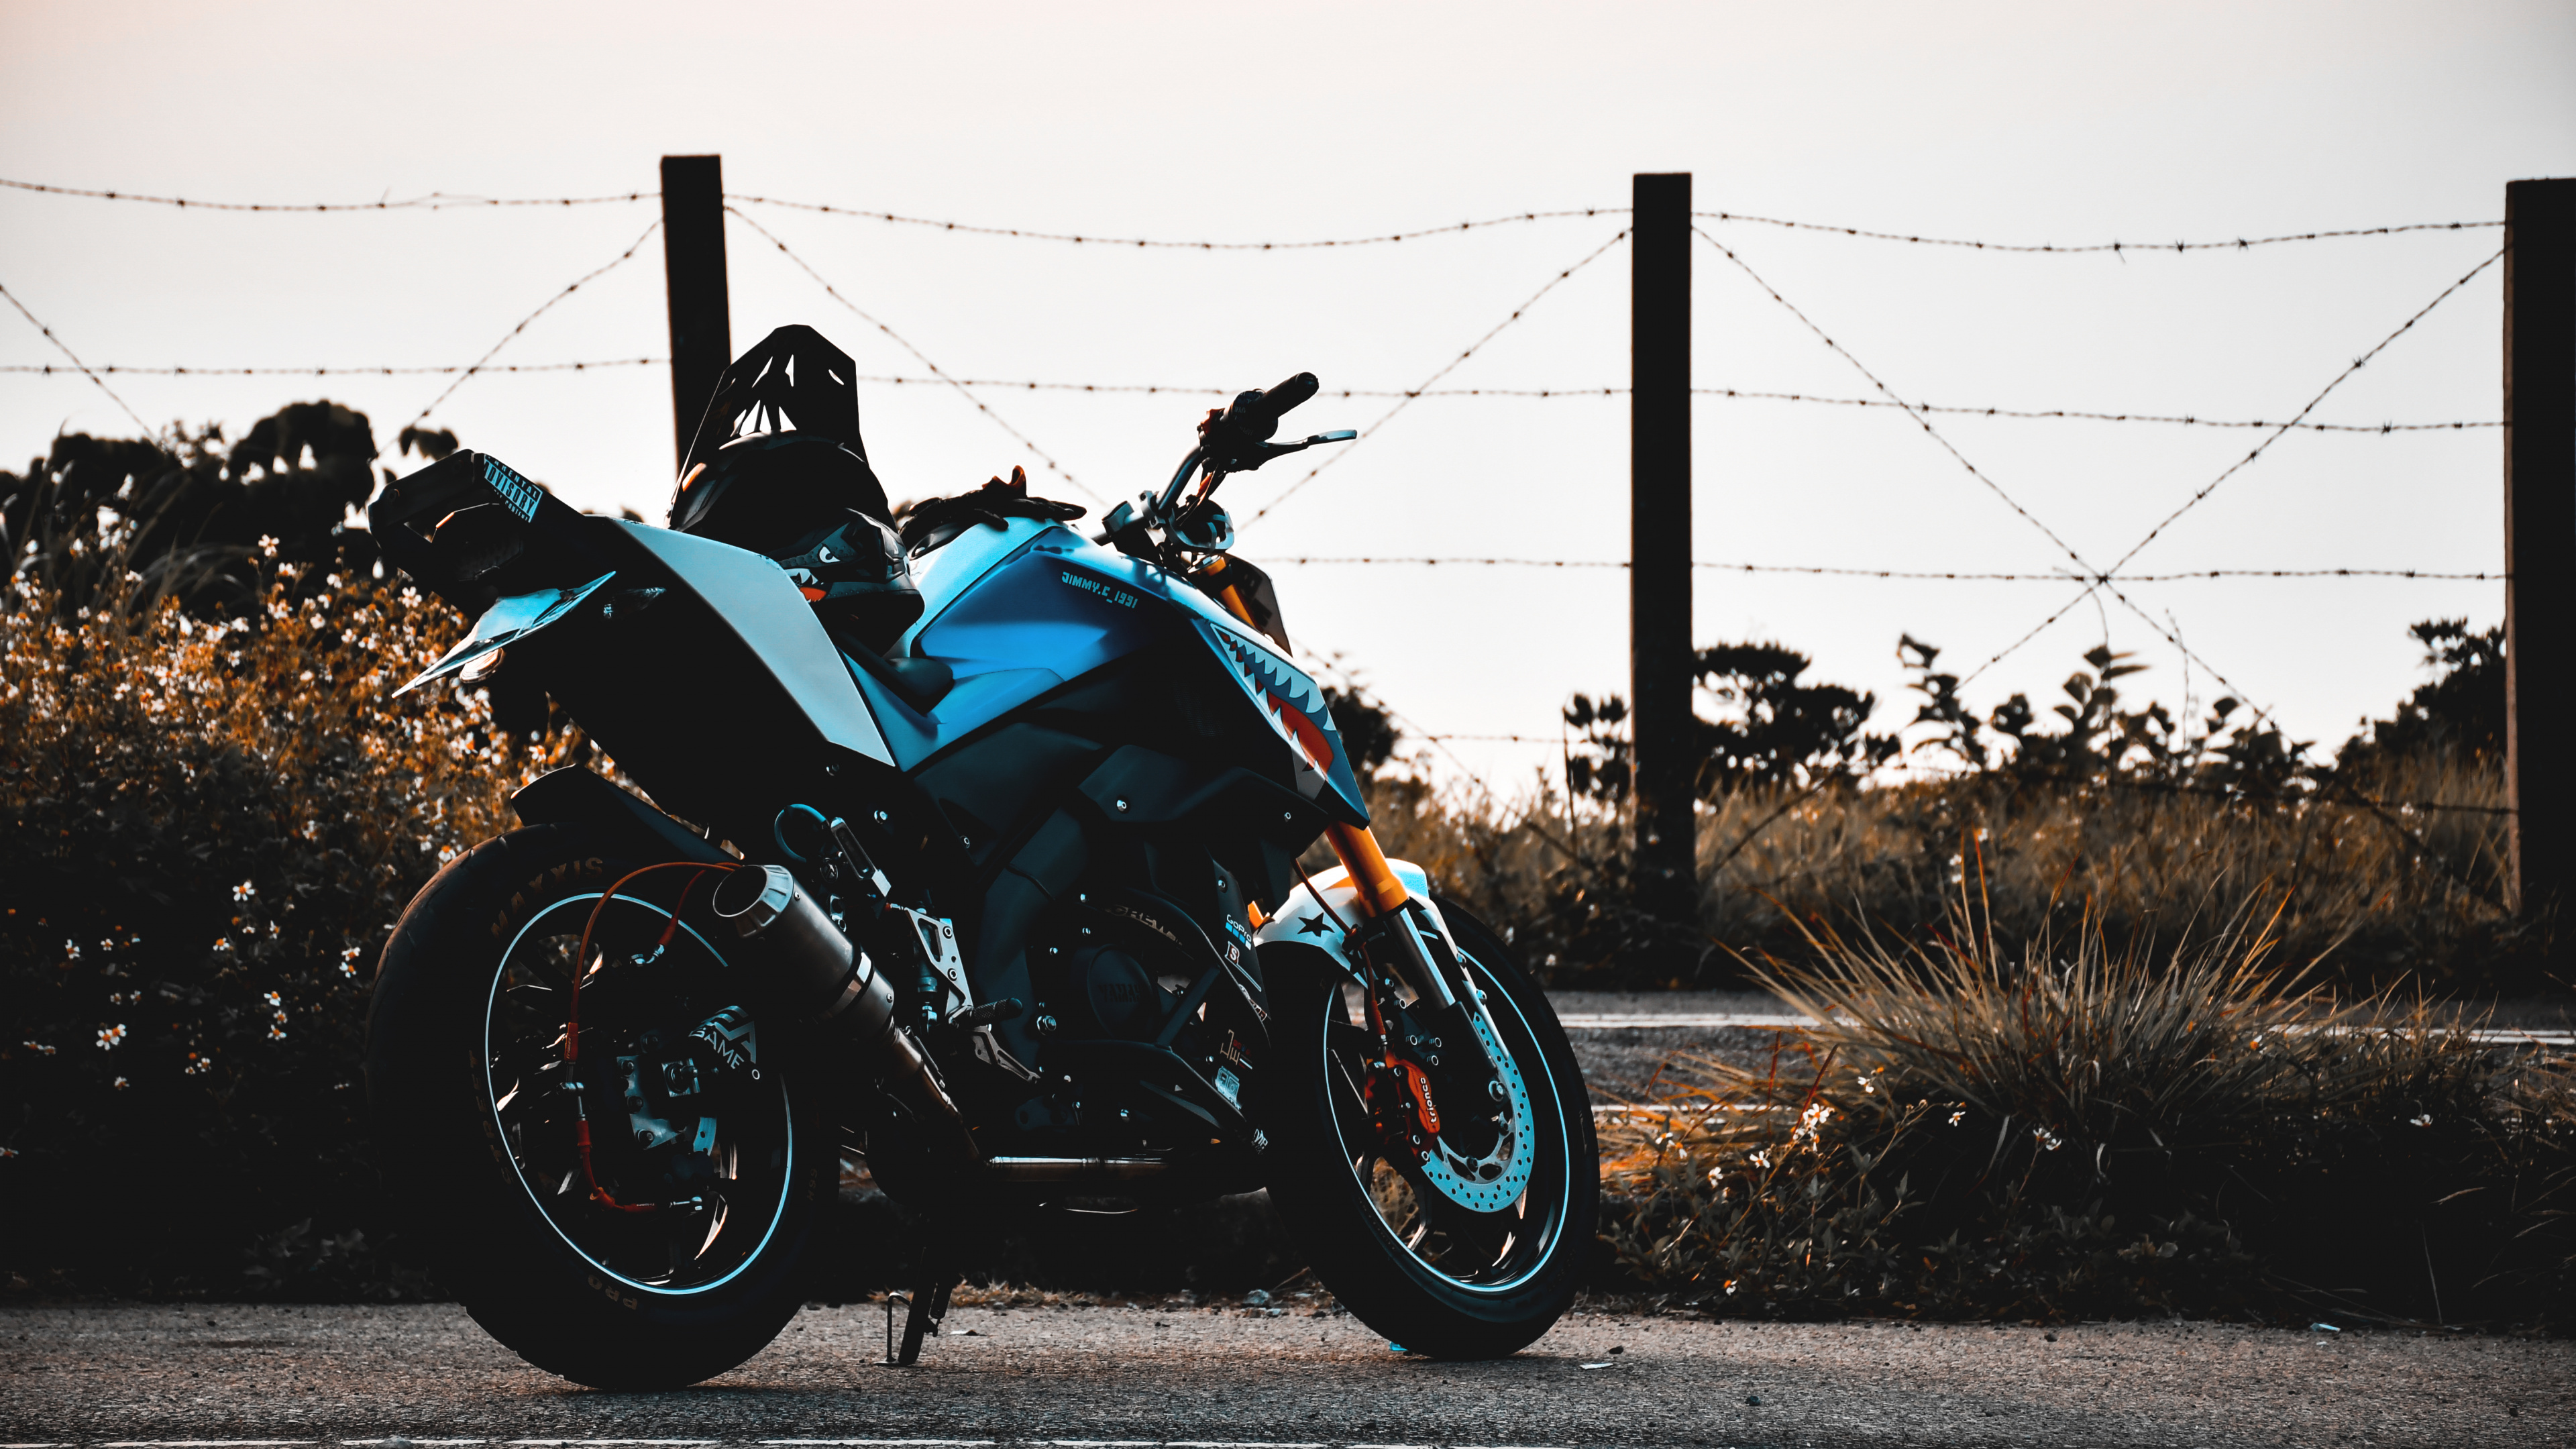 Black and Blue Sports Bike Parked on Gray Concrete Road During Daytime. Wallpaper in 3840x2160 Resolution